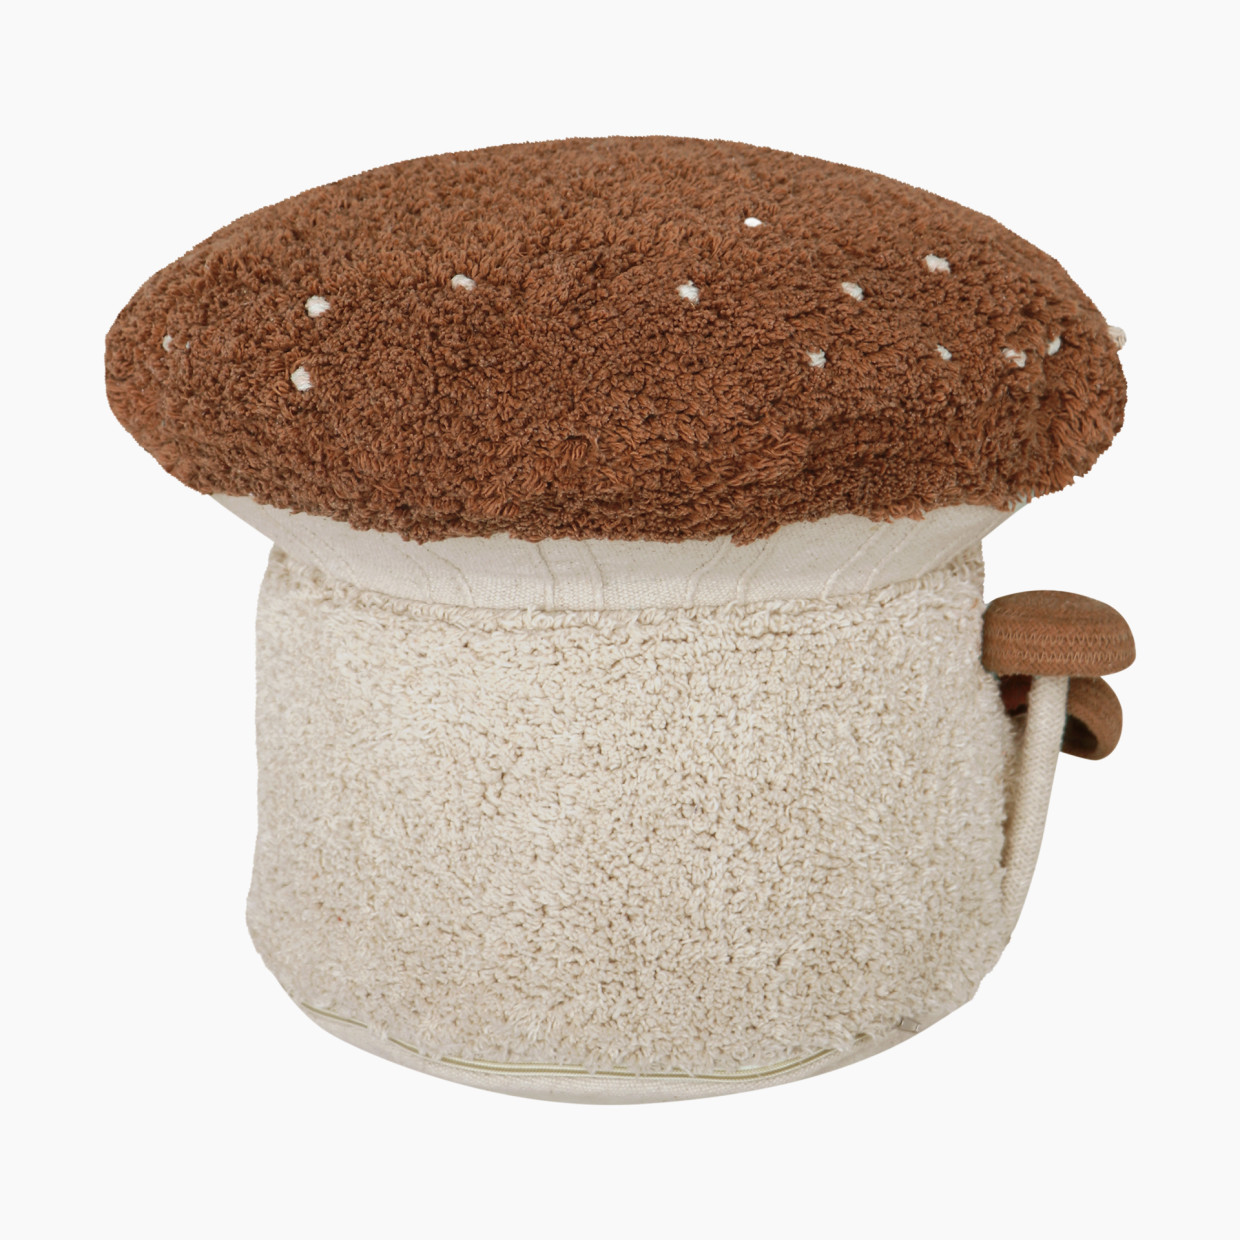 Lorena Canals Boletus Pouf - Toffee, Natural.